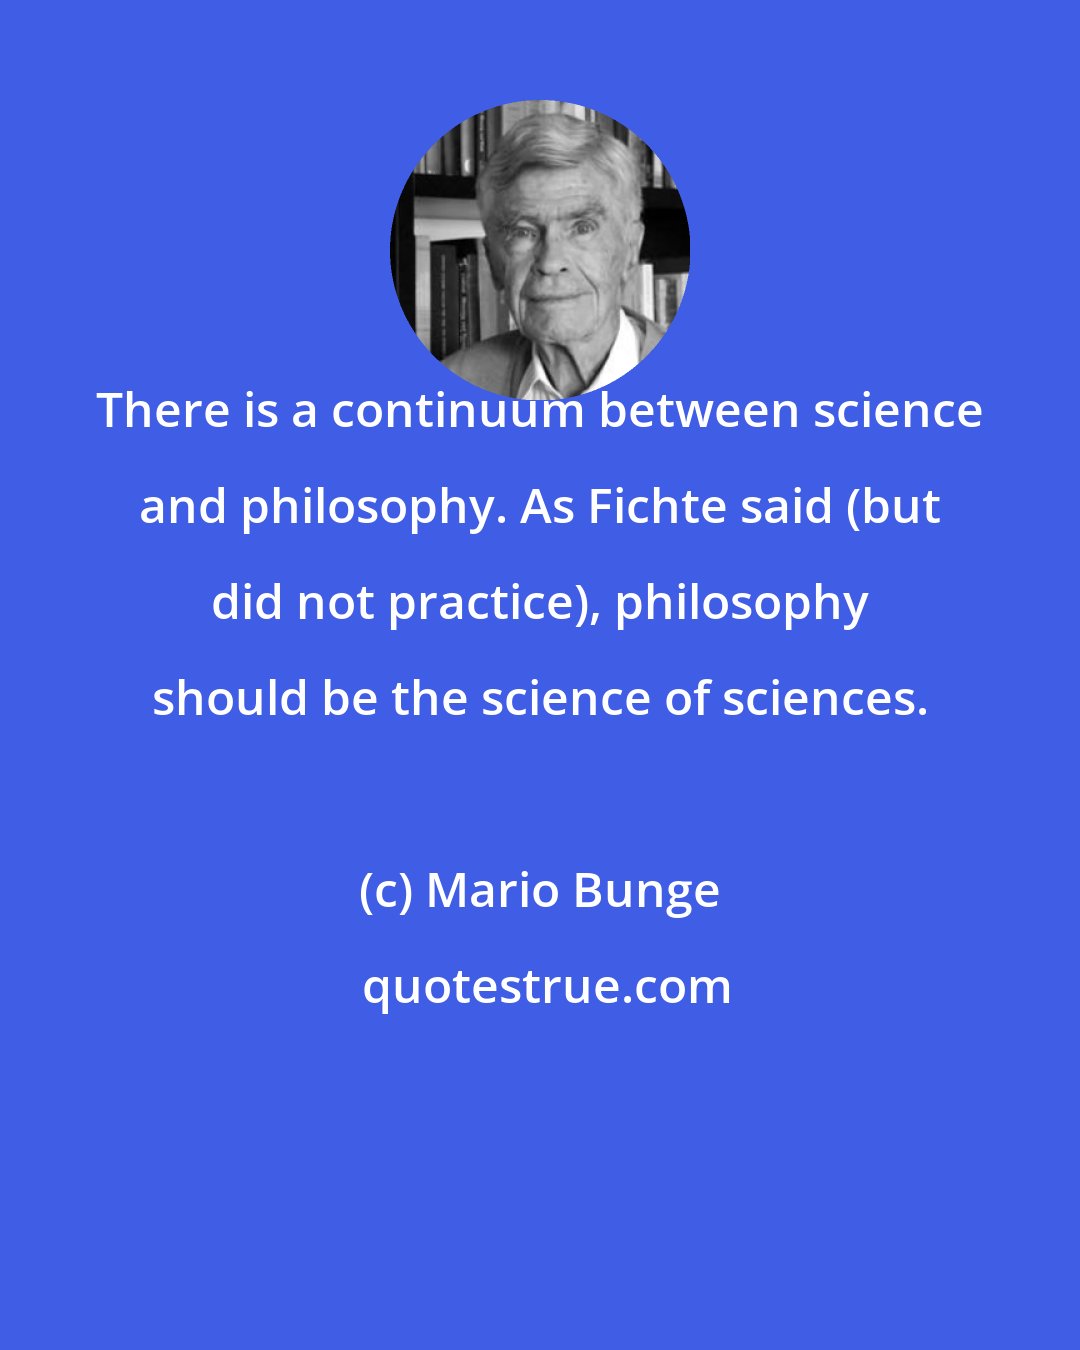 Mario Bunge: There is a continuum between science and philosophy. As Fichte said (but did not practice), philosophy should be the science of sciences.